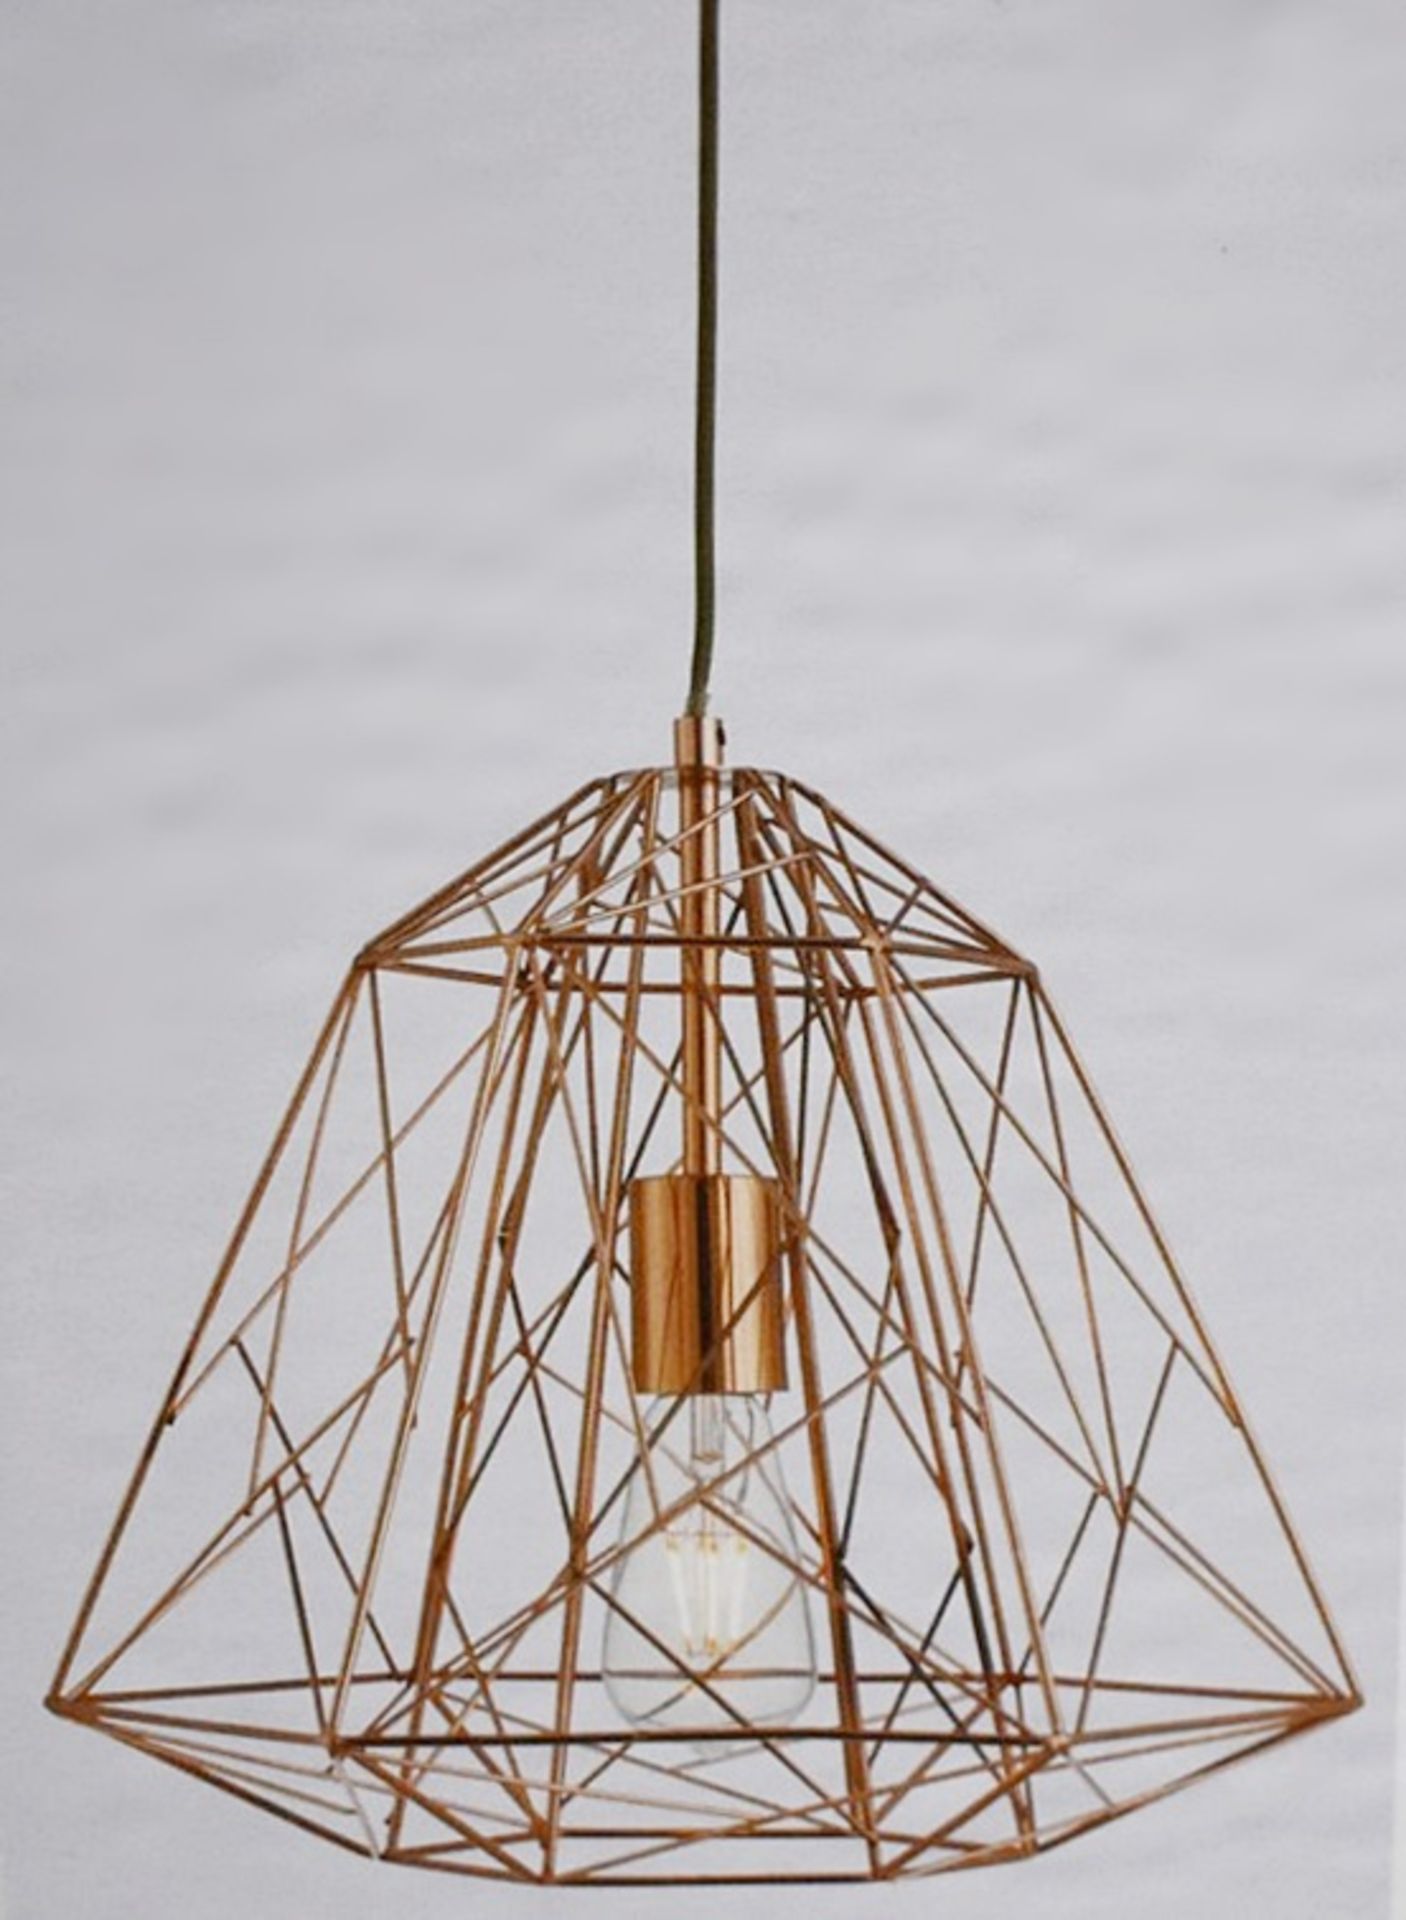 1 x Copper Geometric Cage Frame Pendant Light - New Boxed Stock - CL323 - Ref: 7271CU / PalH